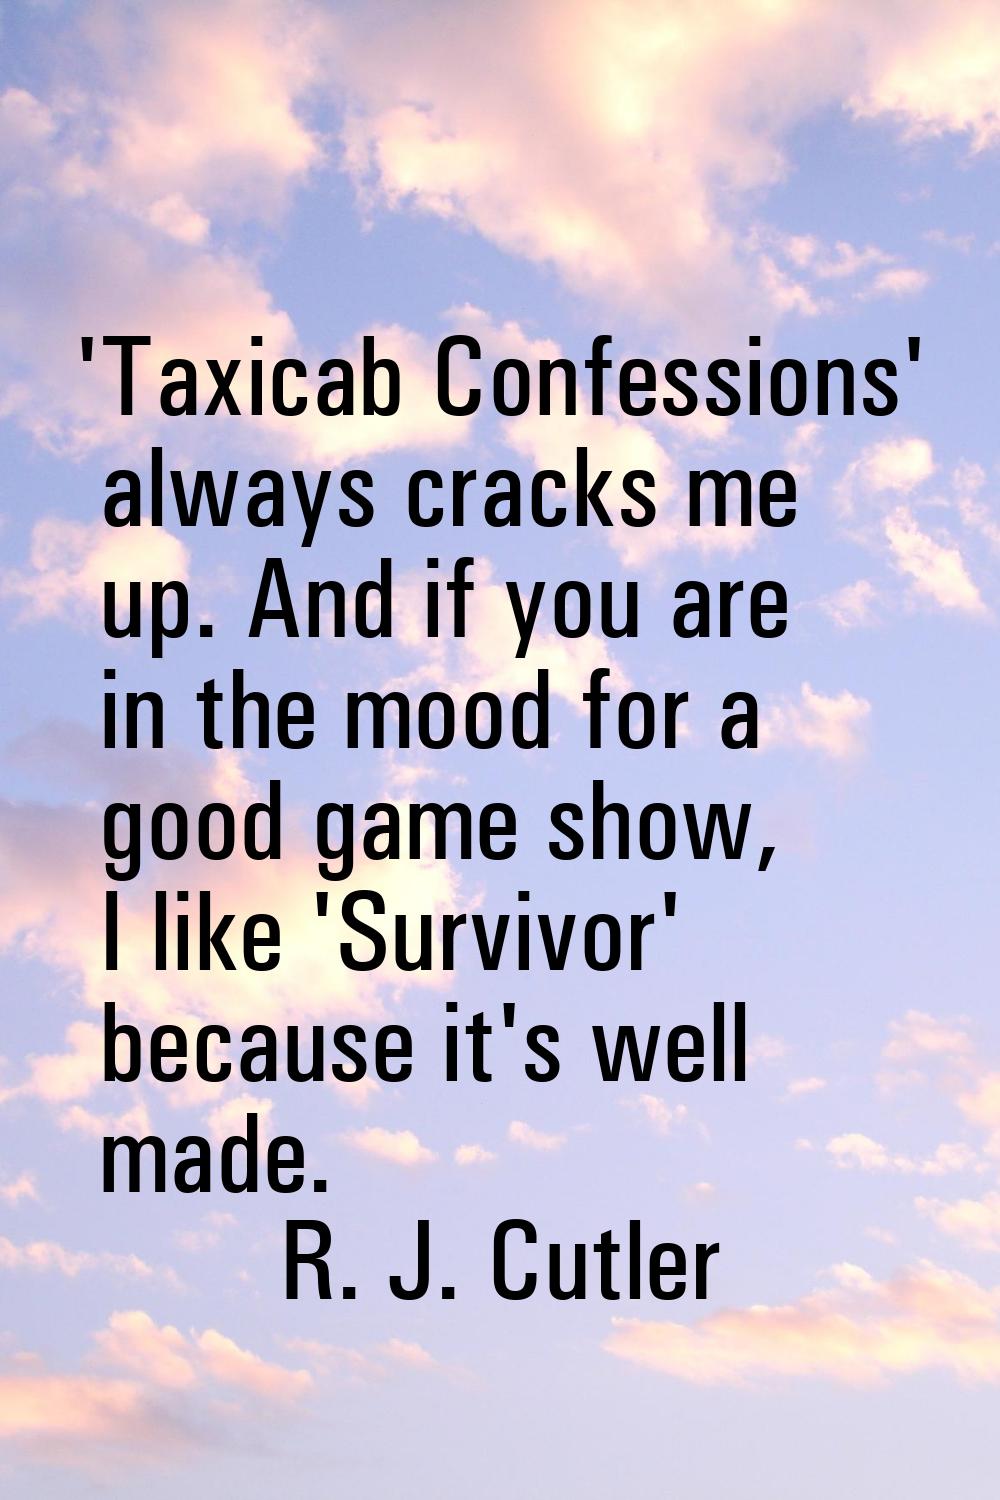 'Taxicab Confessions' always cracks me up. And if you are in the mood for a good game show, I like 